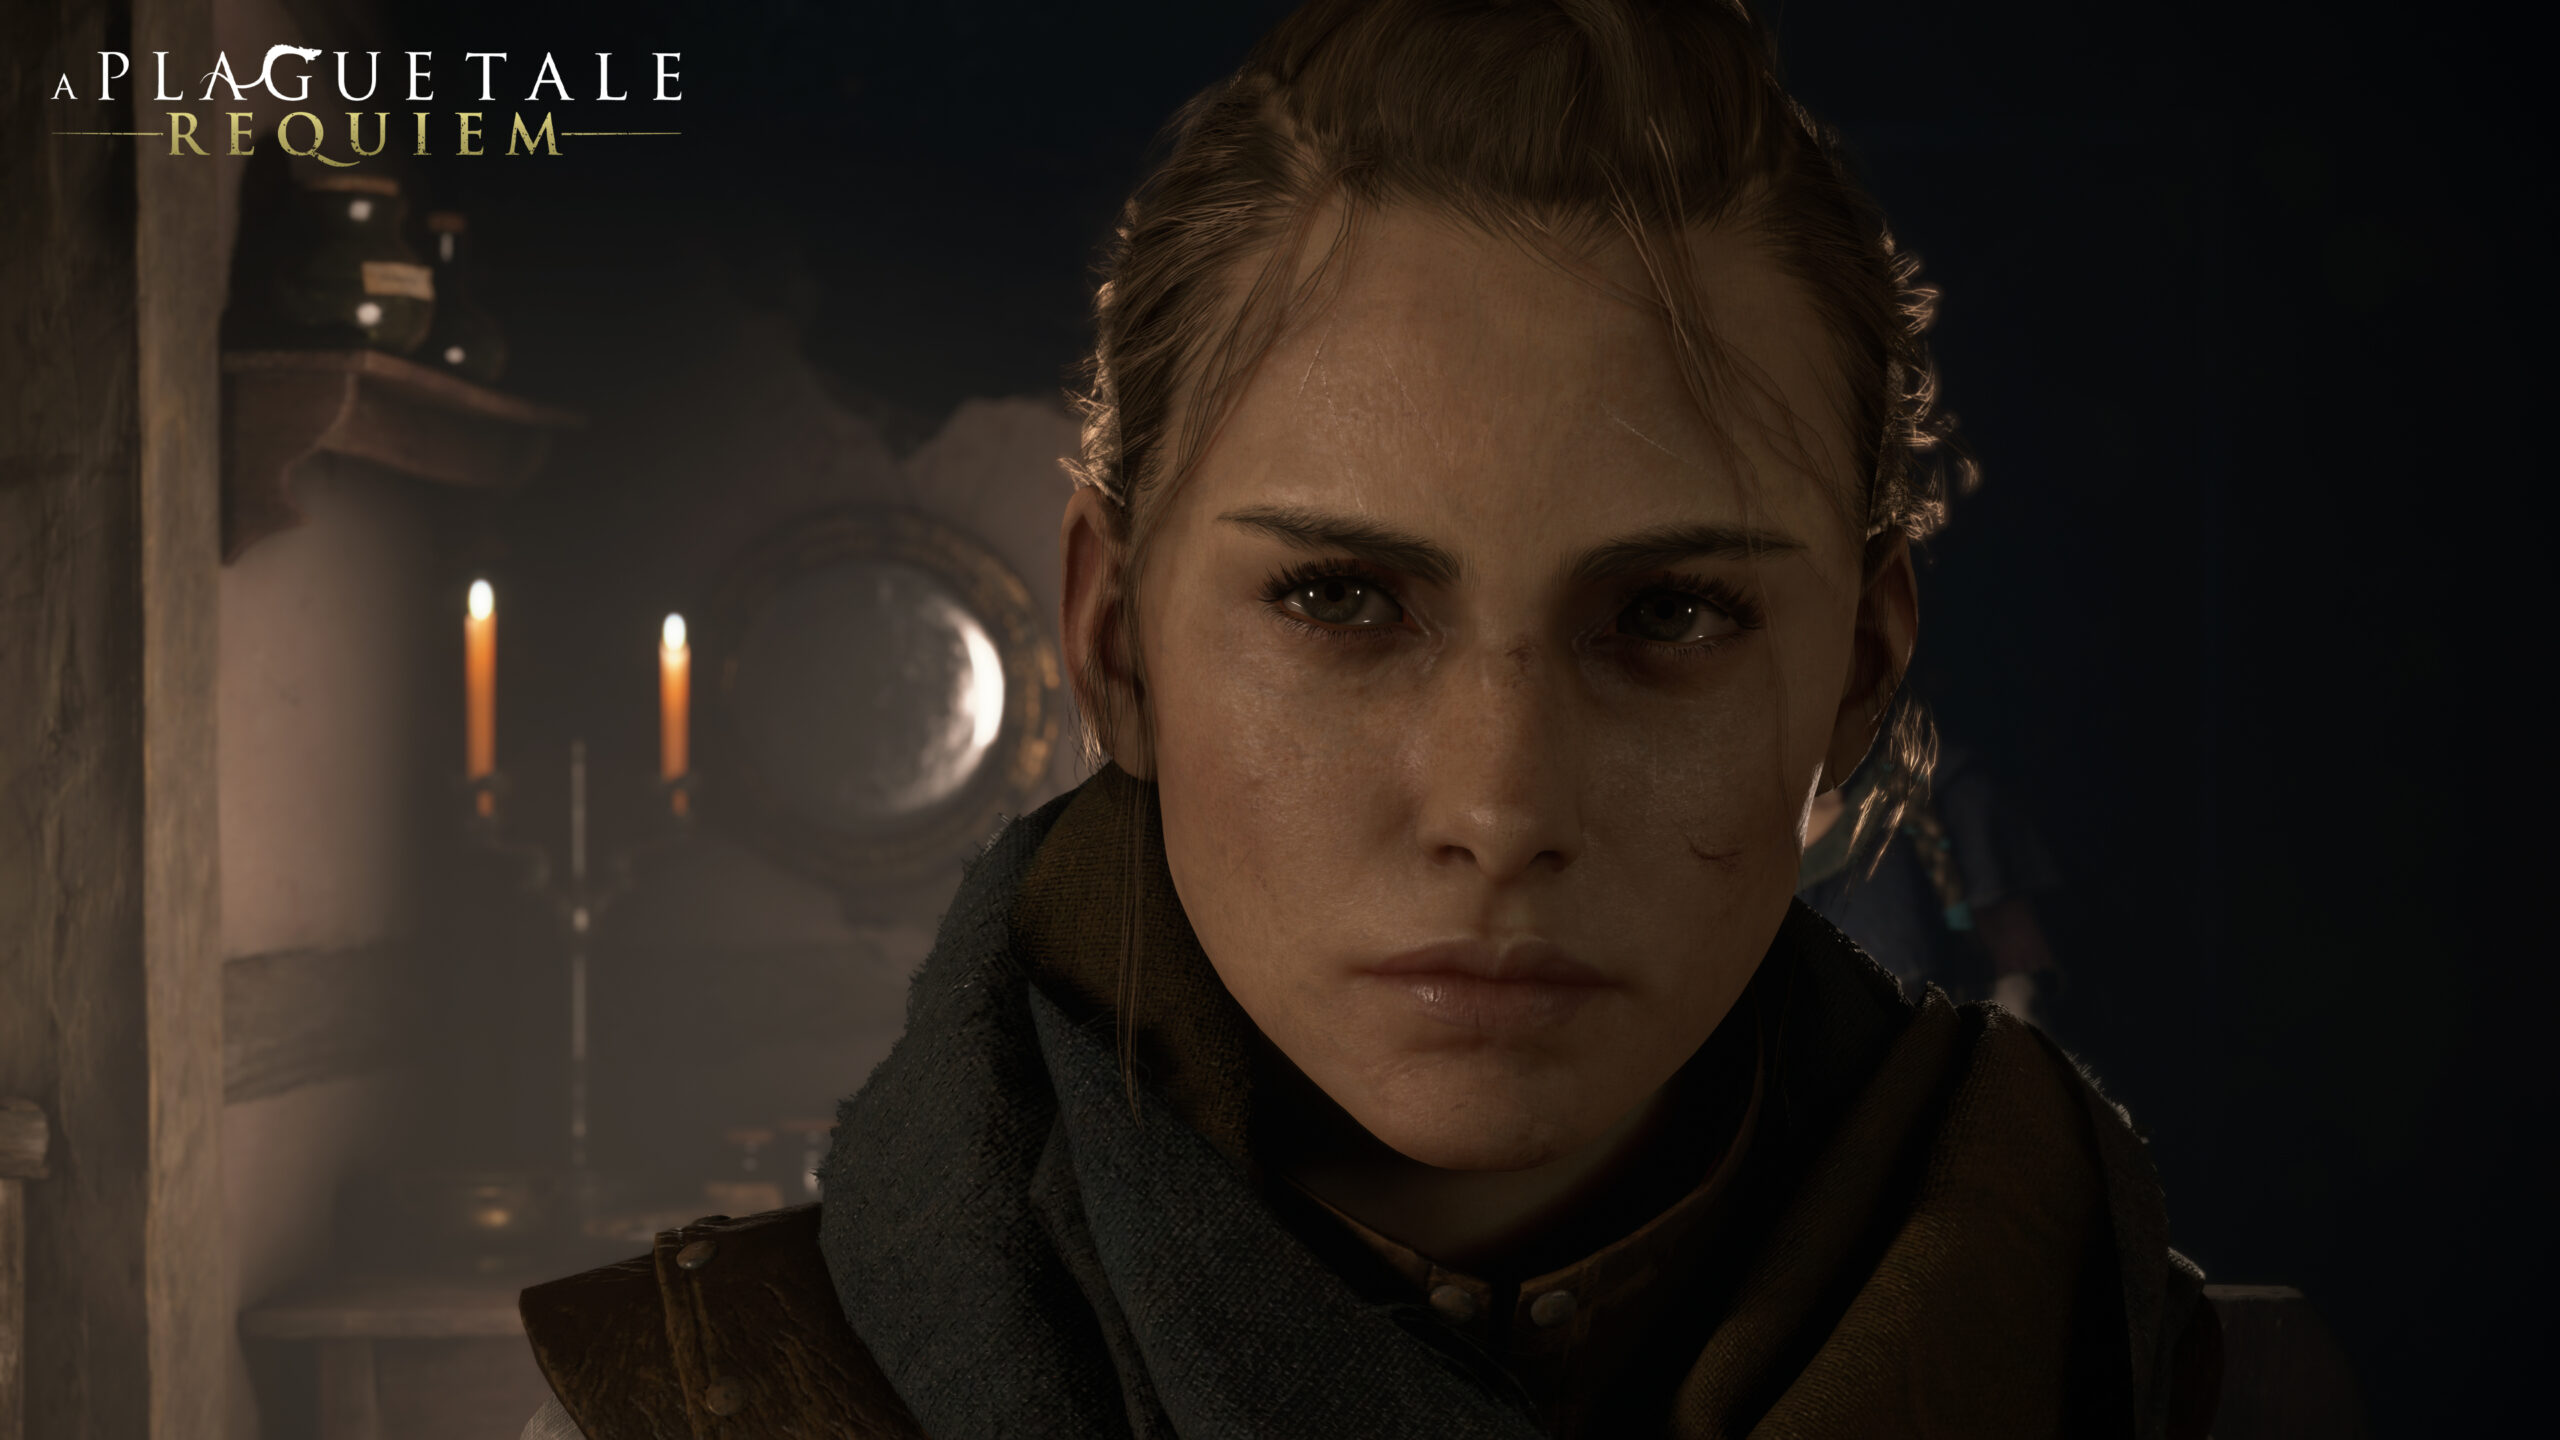 Powering the Astounding Journey of A Plague Tale: Requiem with